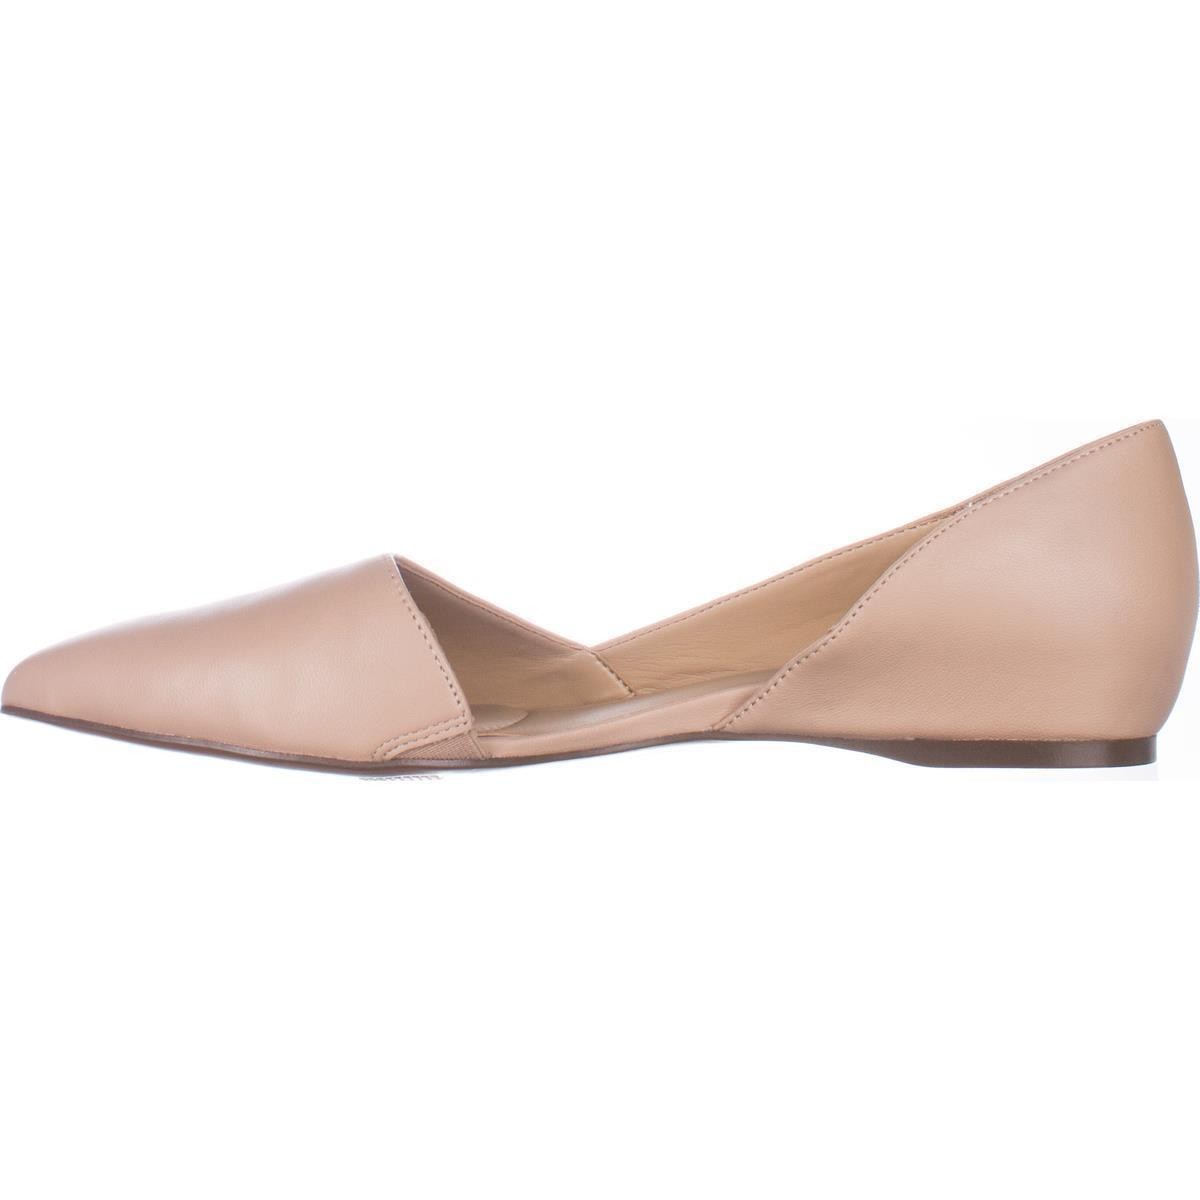 naturalizer samantha pointed toe flats - taupe leather ZNQIMPB